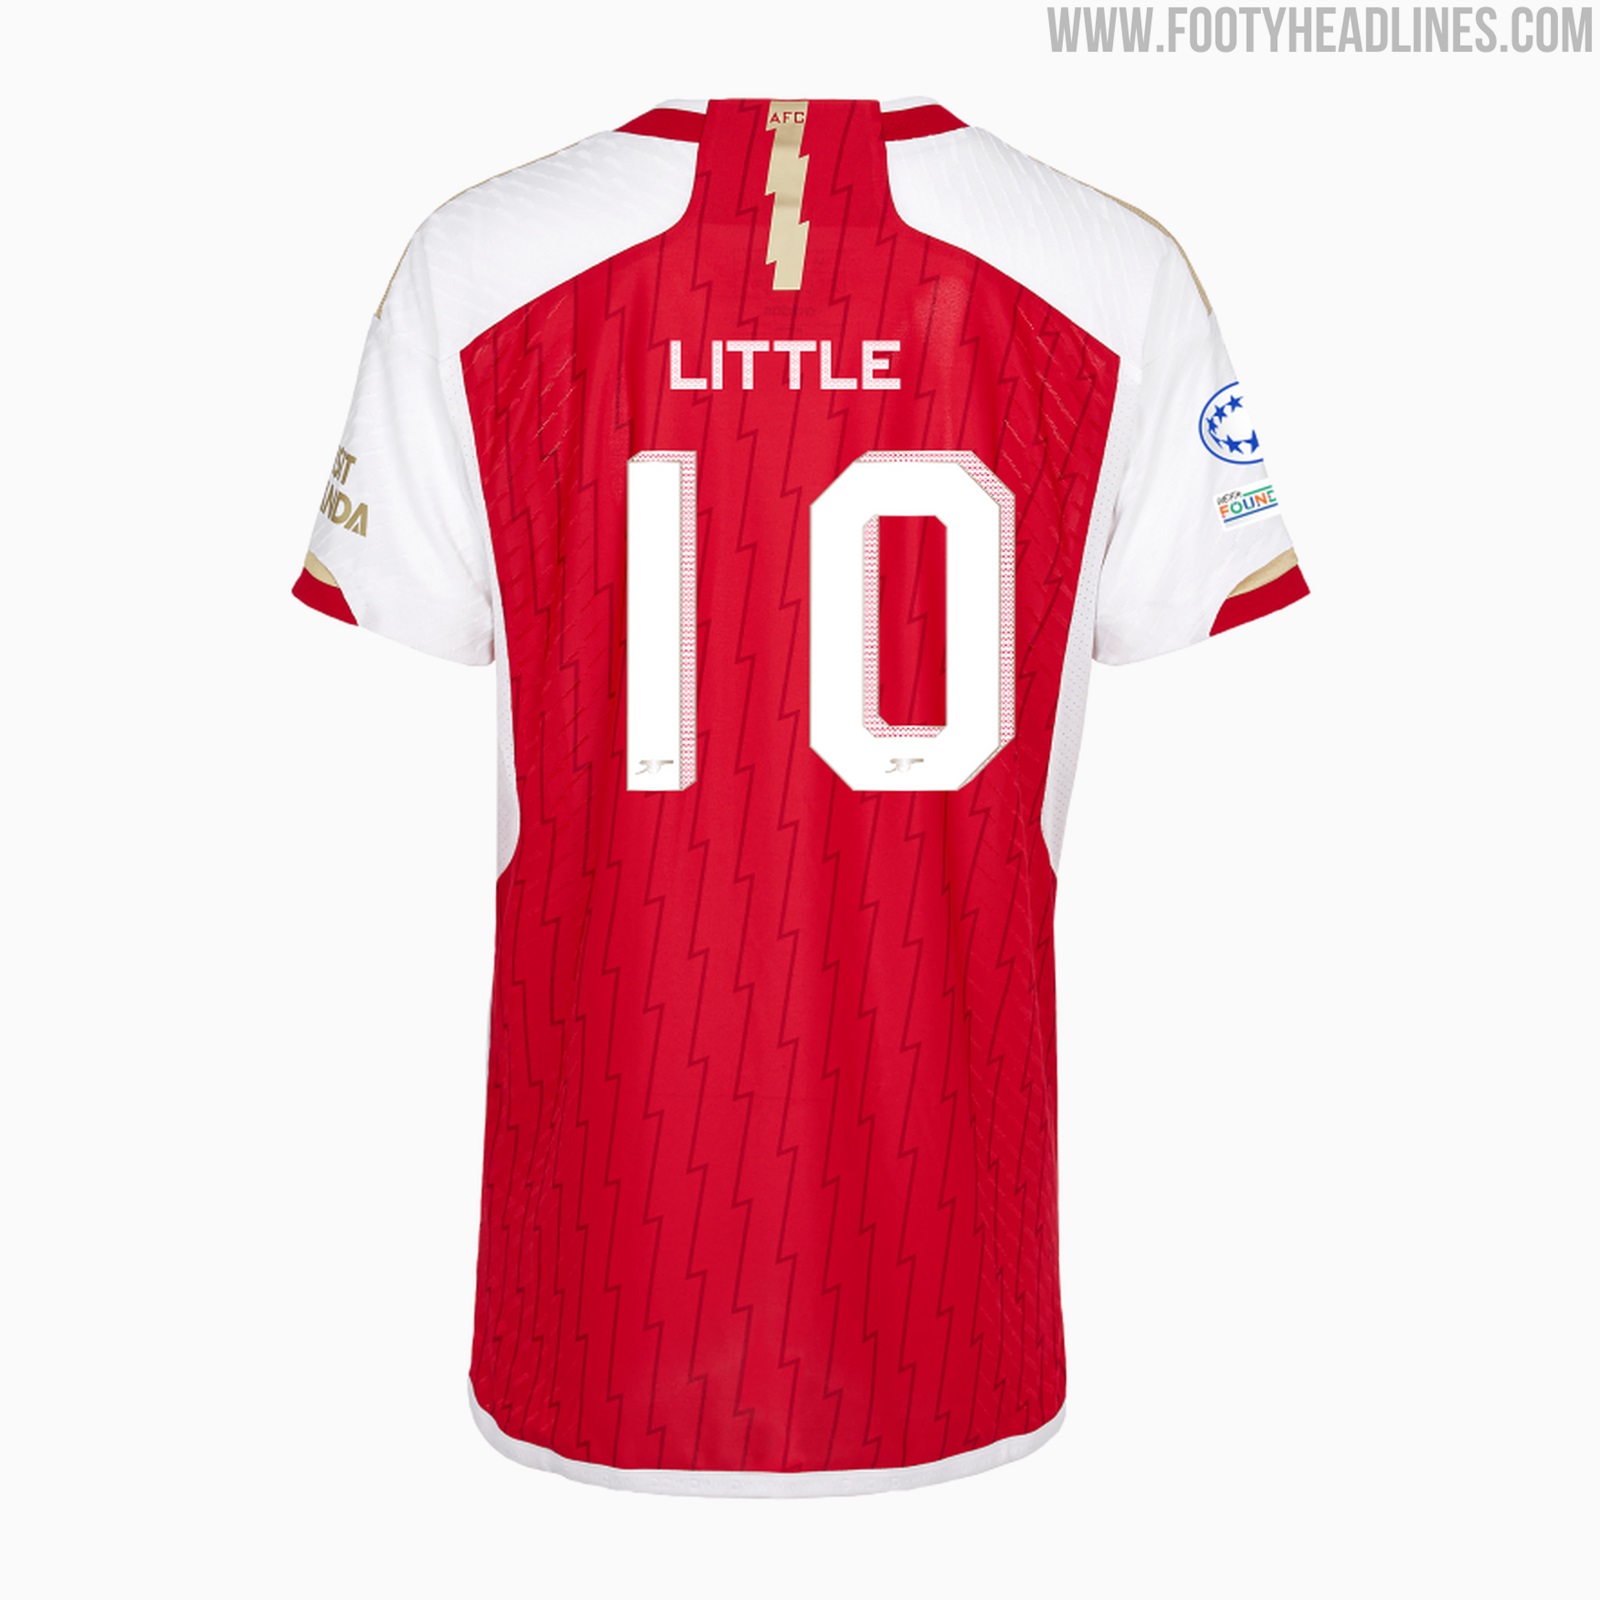 Kit Changed For Match: Arsenal 22-23 Whiteout Kit Released - Footy